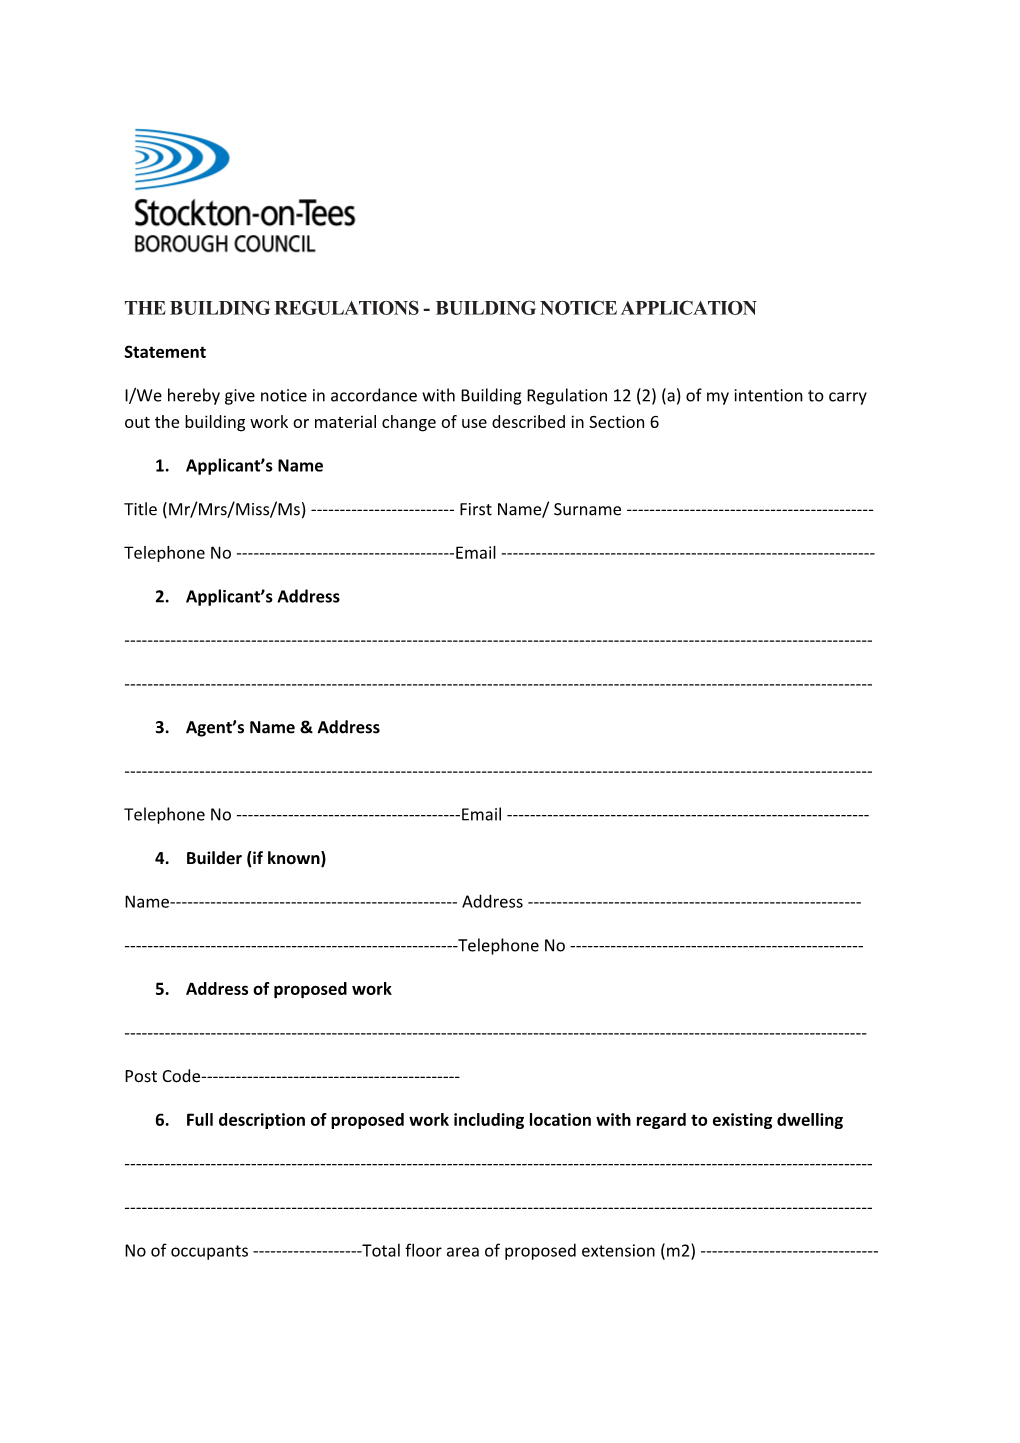 The Building Regulations - Building Notice Application